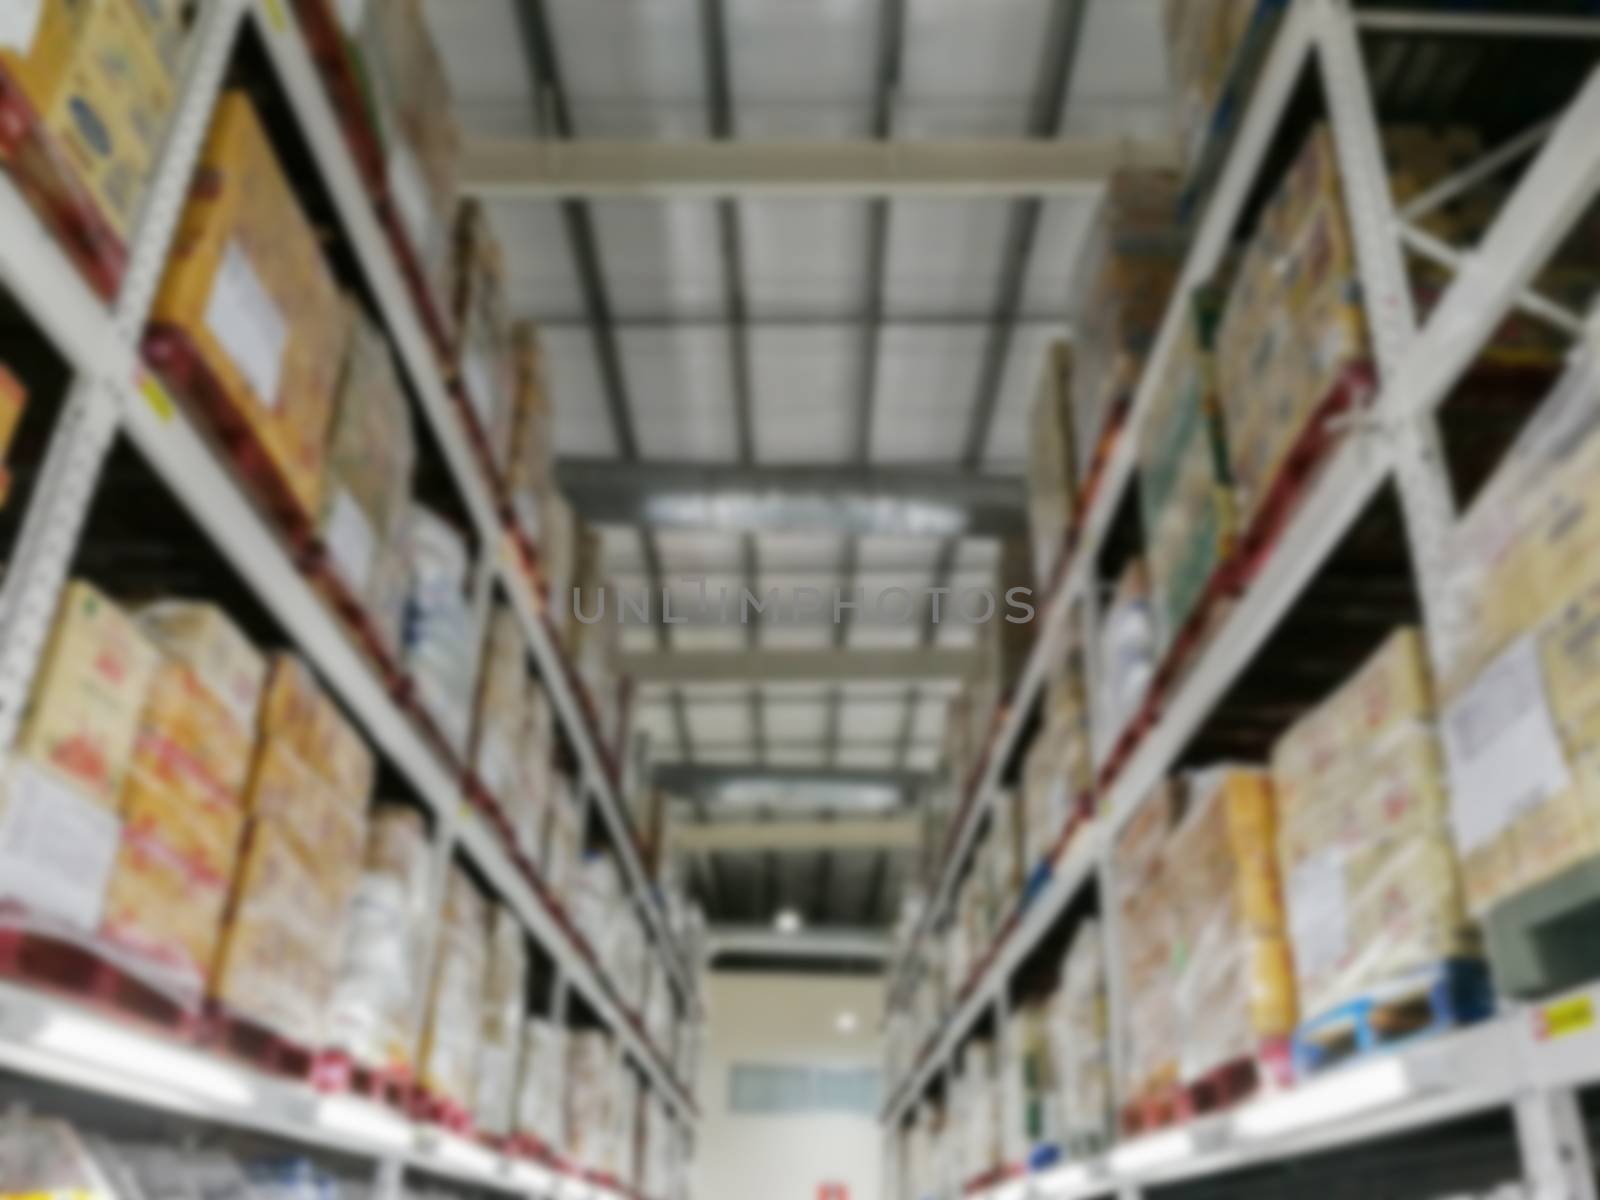 Warehouse storage of goods in warehouses, blurred images by sompongtom